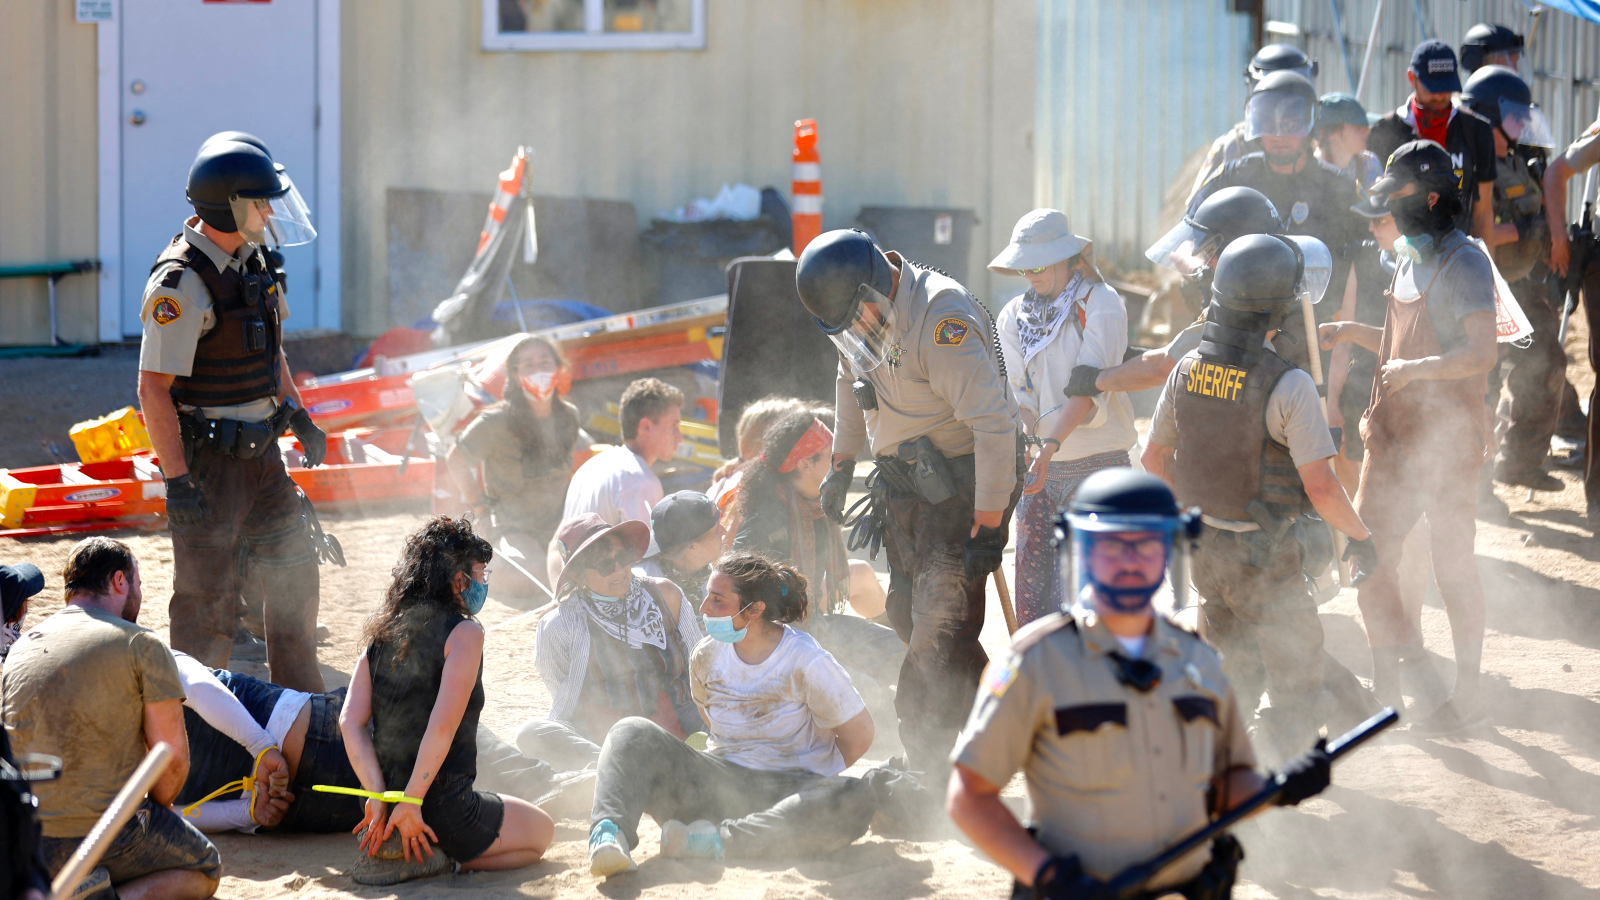 Police in riot gear arrest environmental activists at the Line 3 pipeline pumping station near the Itasca State Park, Minnesota on June 7, 2021.